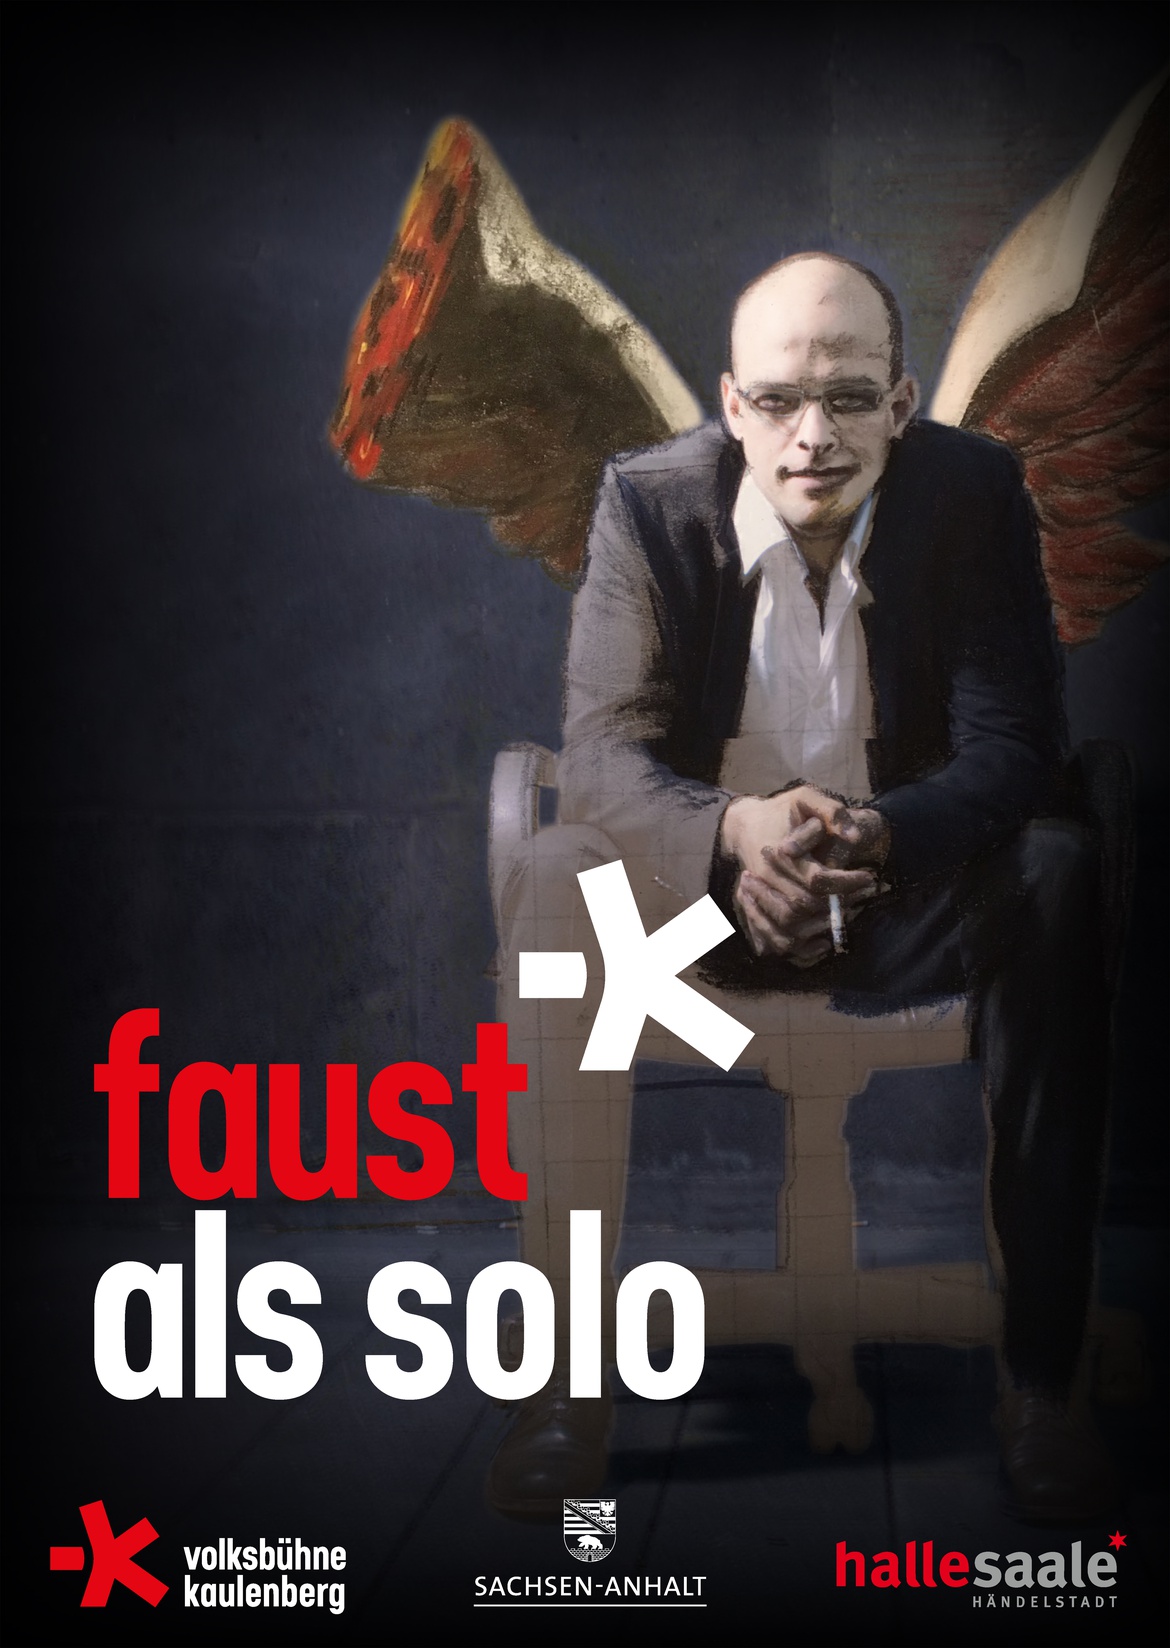 Faust als Solo - Osteredition